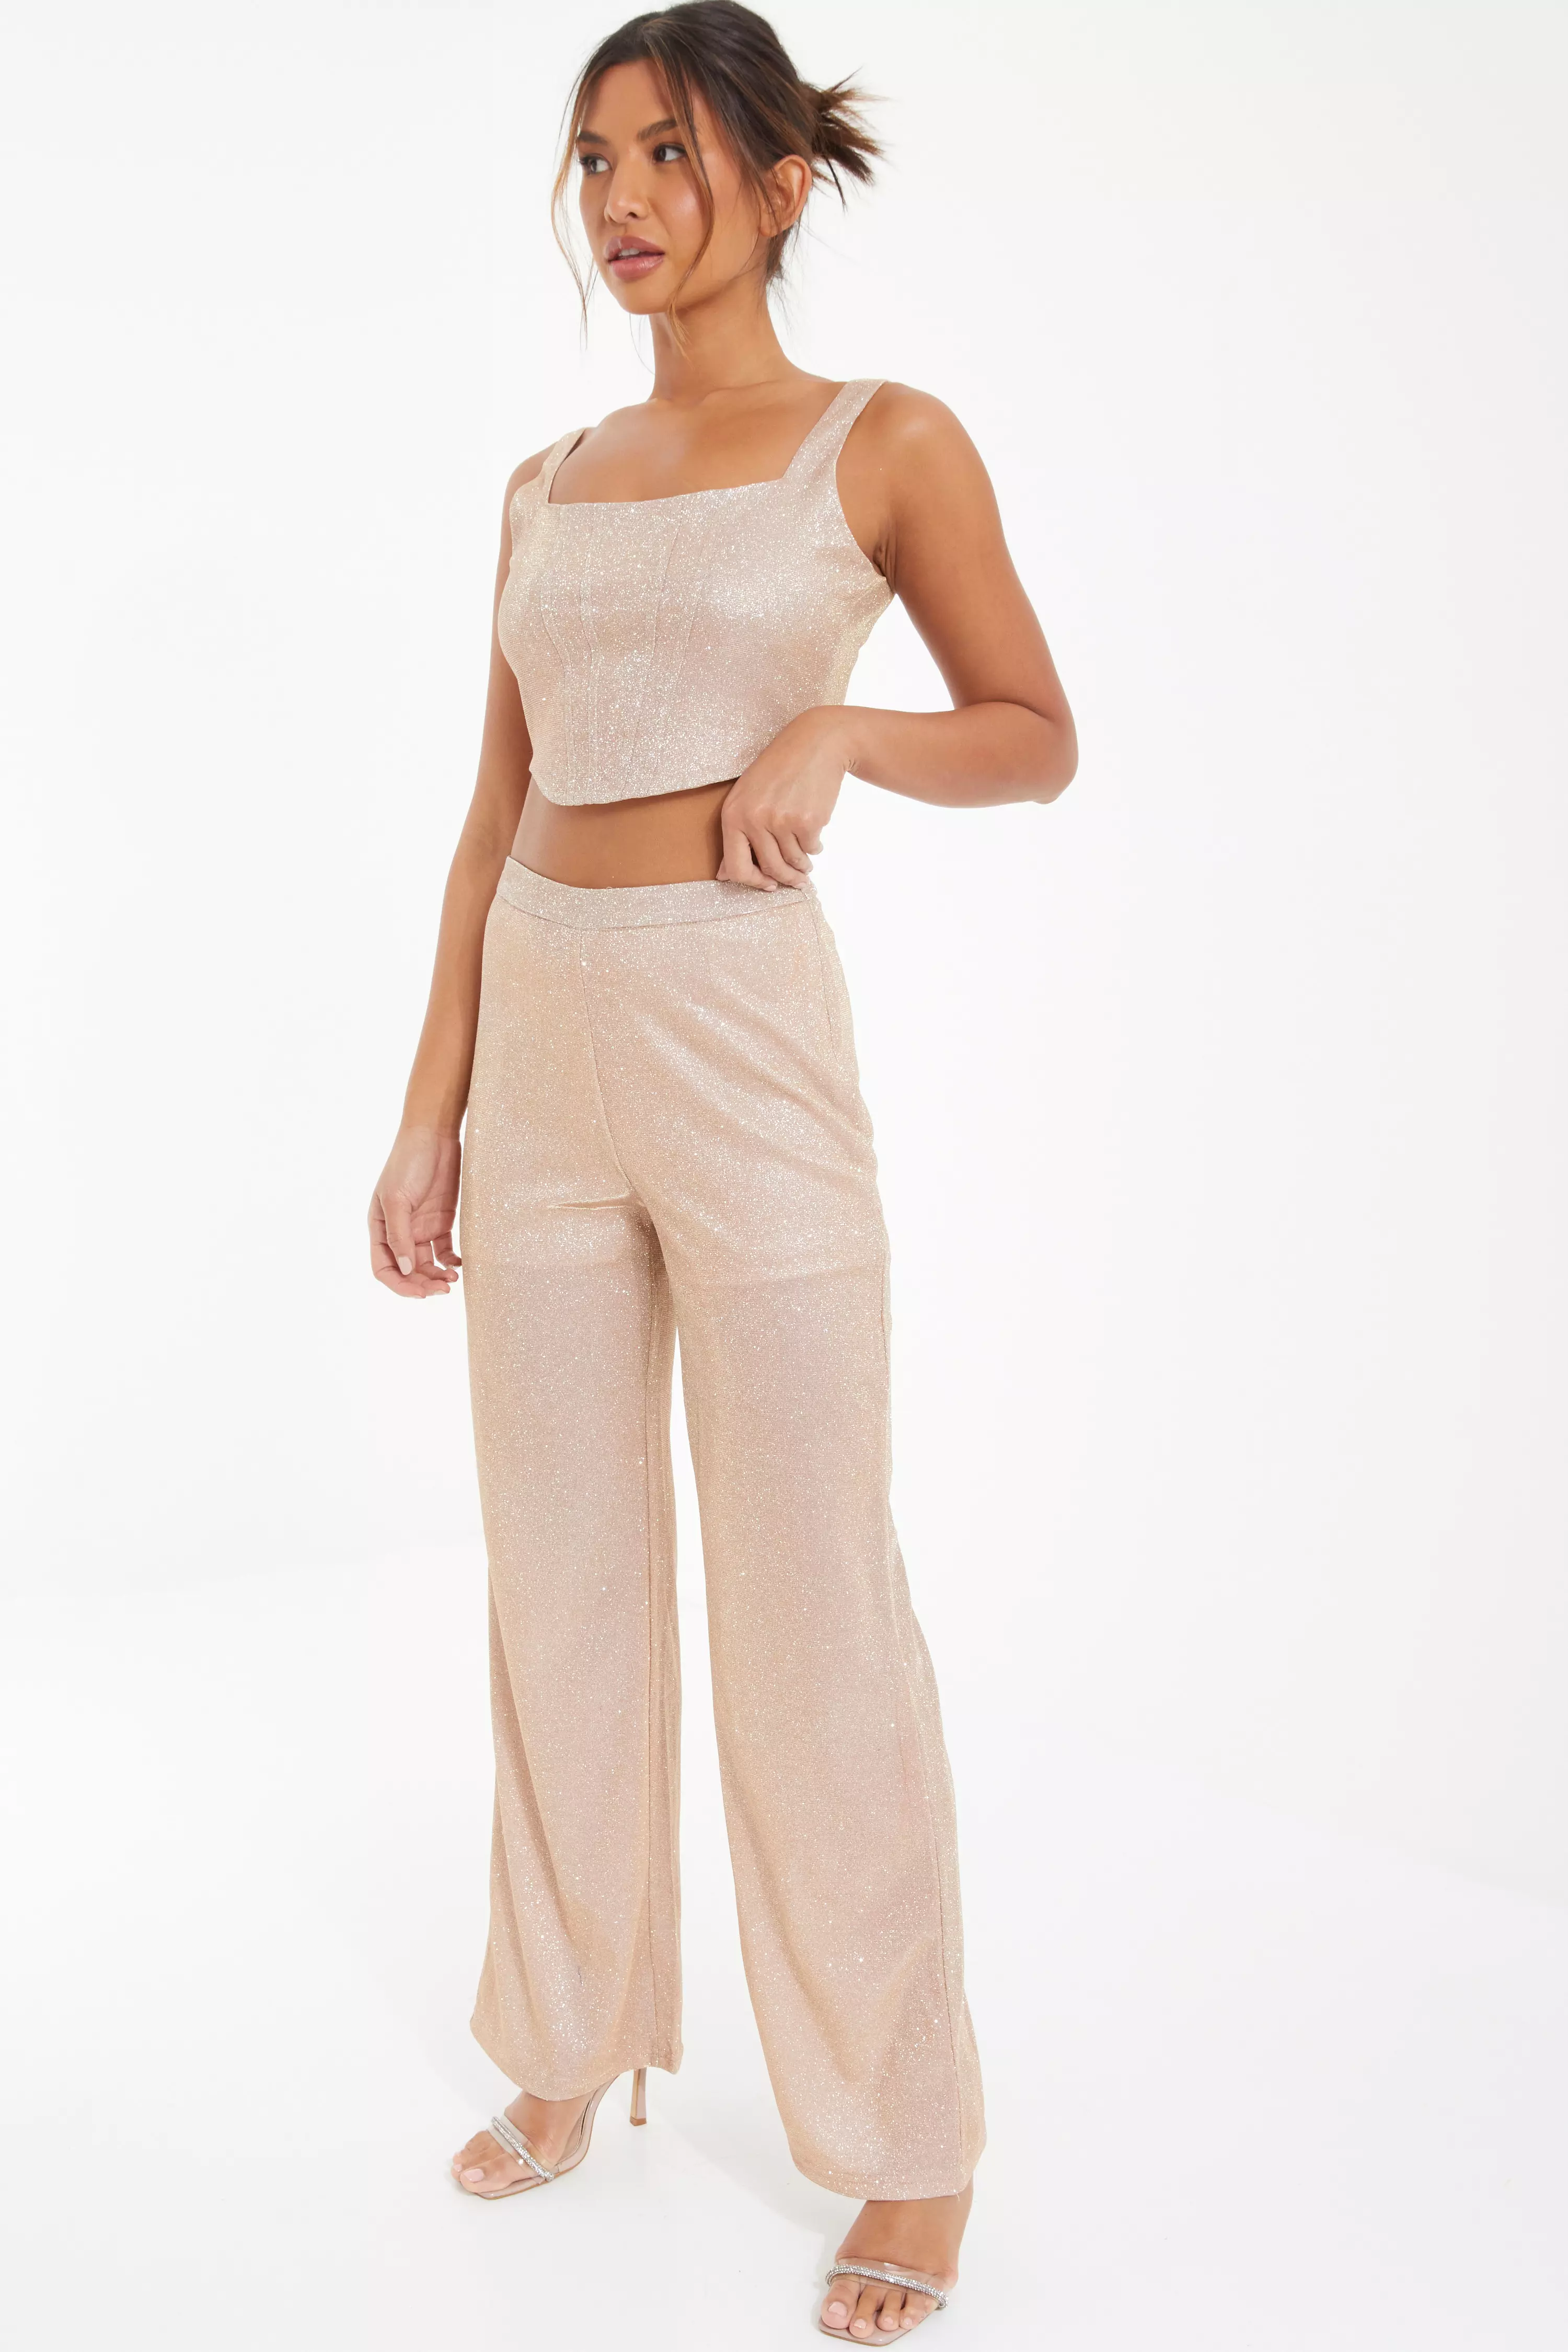 Champagne Glitter Palazzo Trouser - QUIZ Clothing